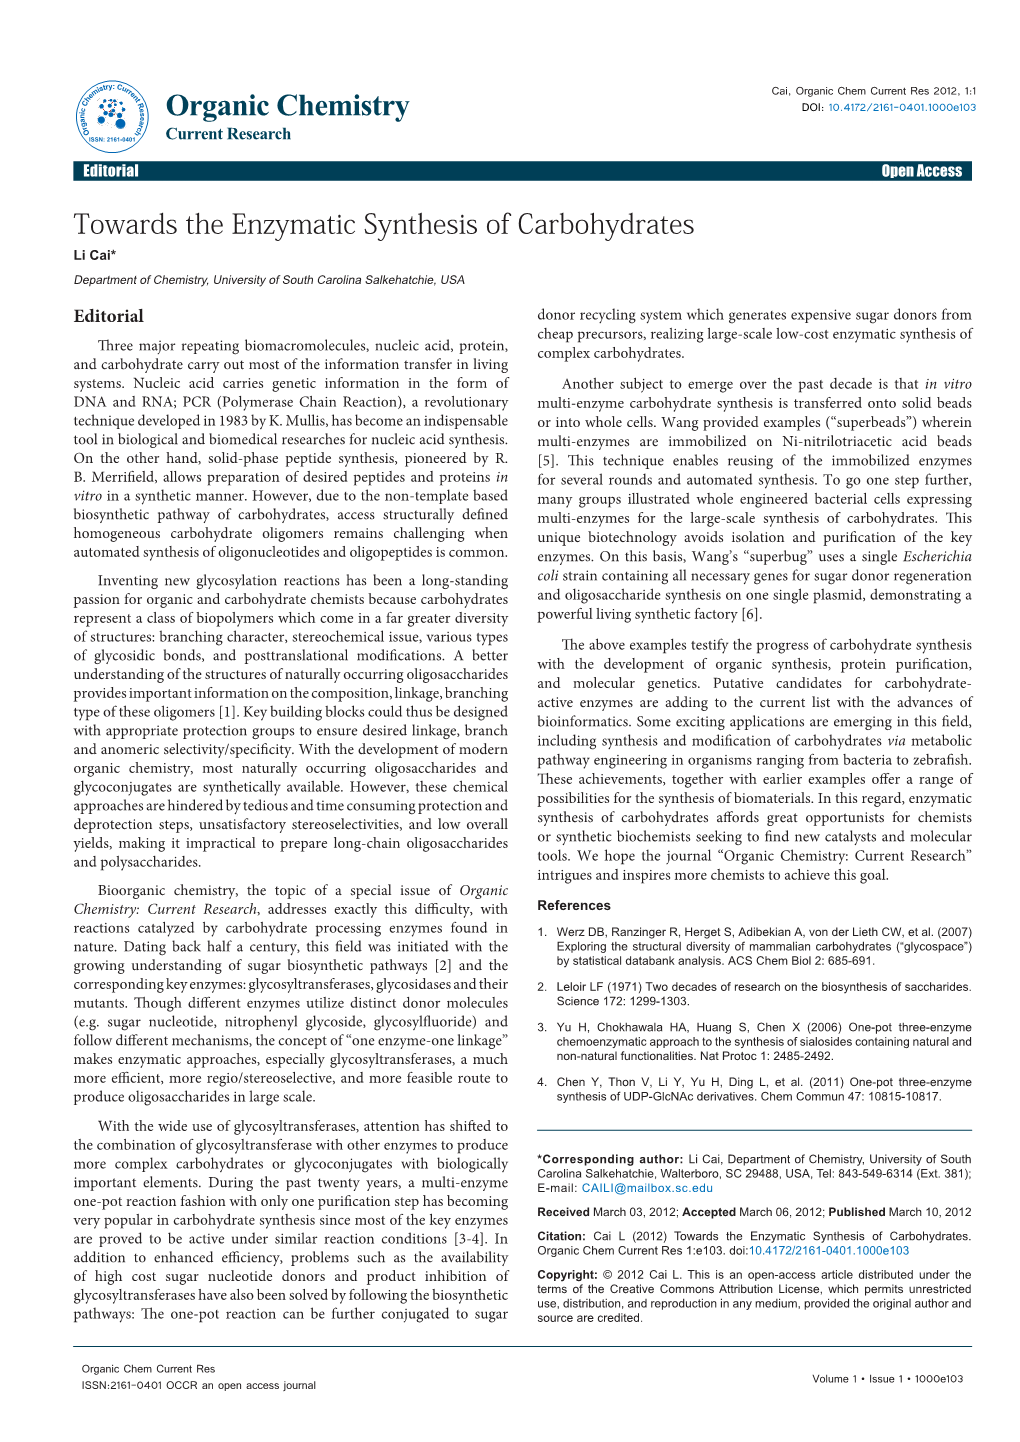 Towards the Enzymatic Synthesis of Carbohydrates Li Cai* Department of Chemistry, University of South Carolina Salkehatchie, USA